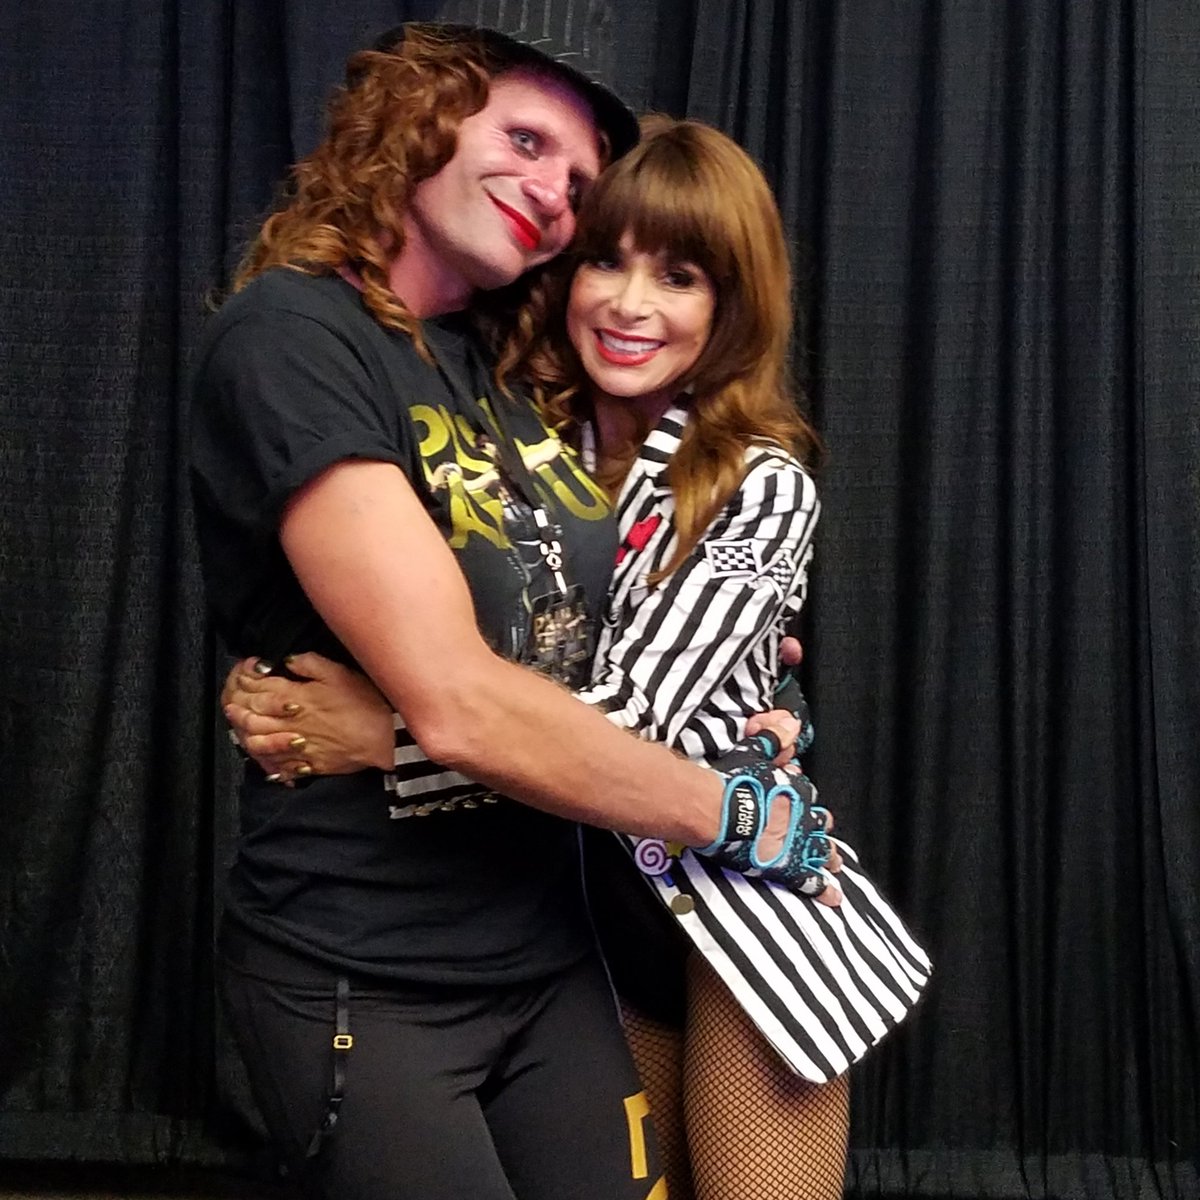 RT @MadonnaLoveDale: Hi @1075KZL  @WXII  check out me and our friend  @PaulaAbdul She loves me like you do in #NorthCarolina https://t.co/e…